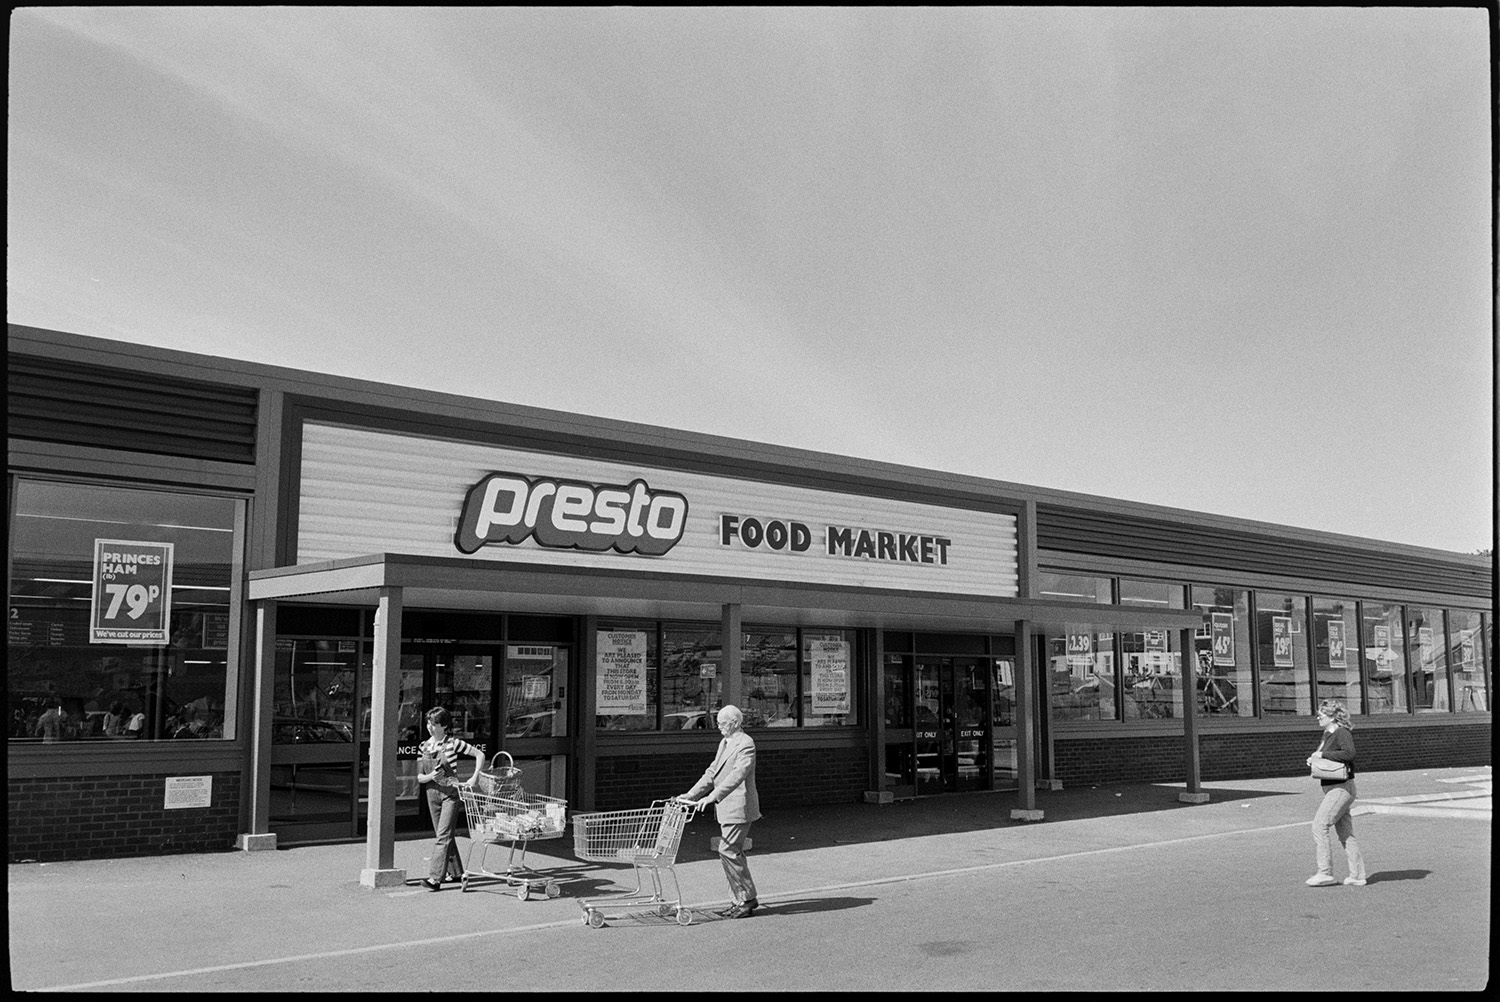 Interior of supermarket, people shopping, car park. Fruit, cash desk, check out.
[The entrance to Presto Food Market in Bideford, with three shoppers outside pushing shopping trolleys.]